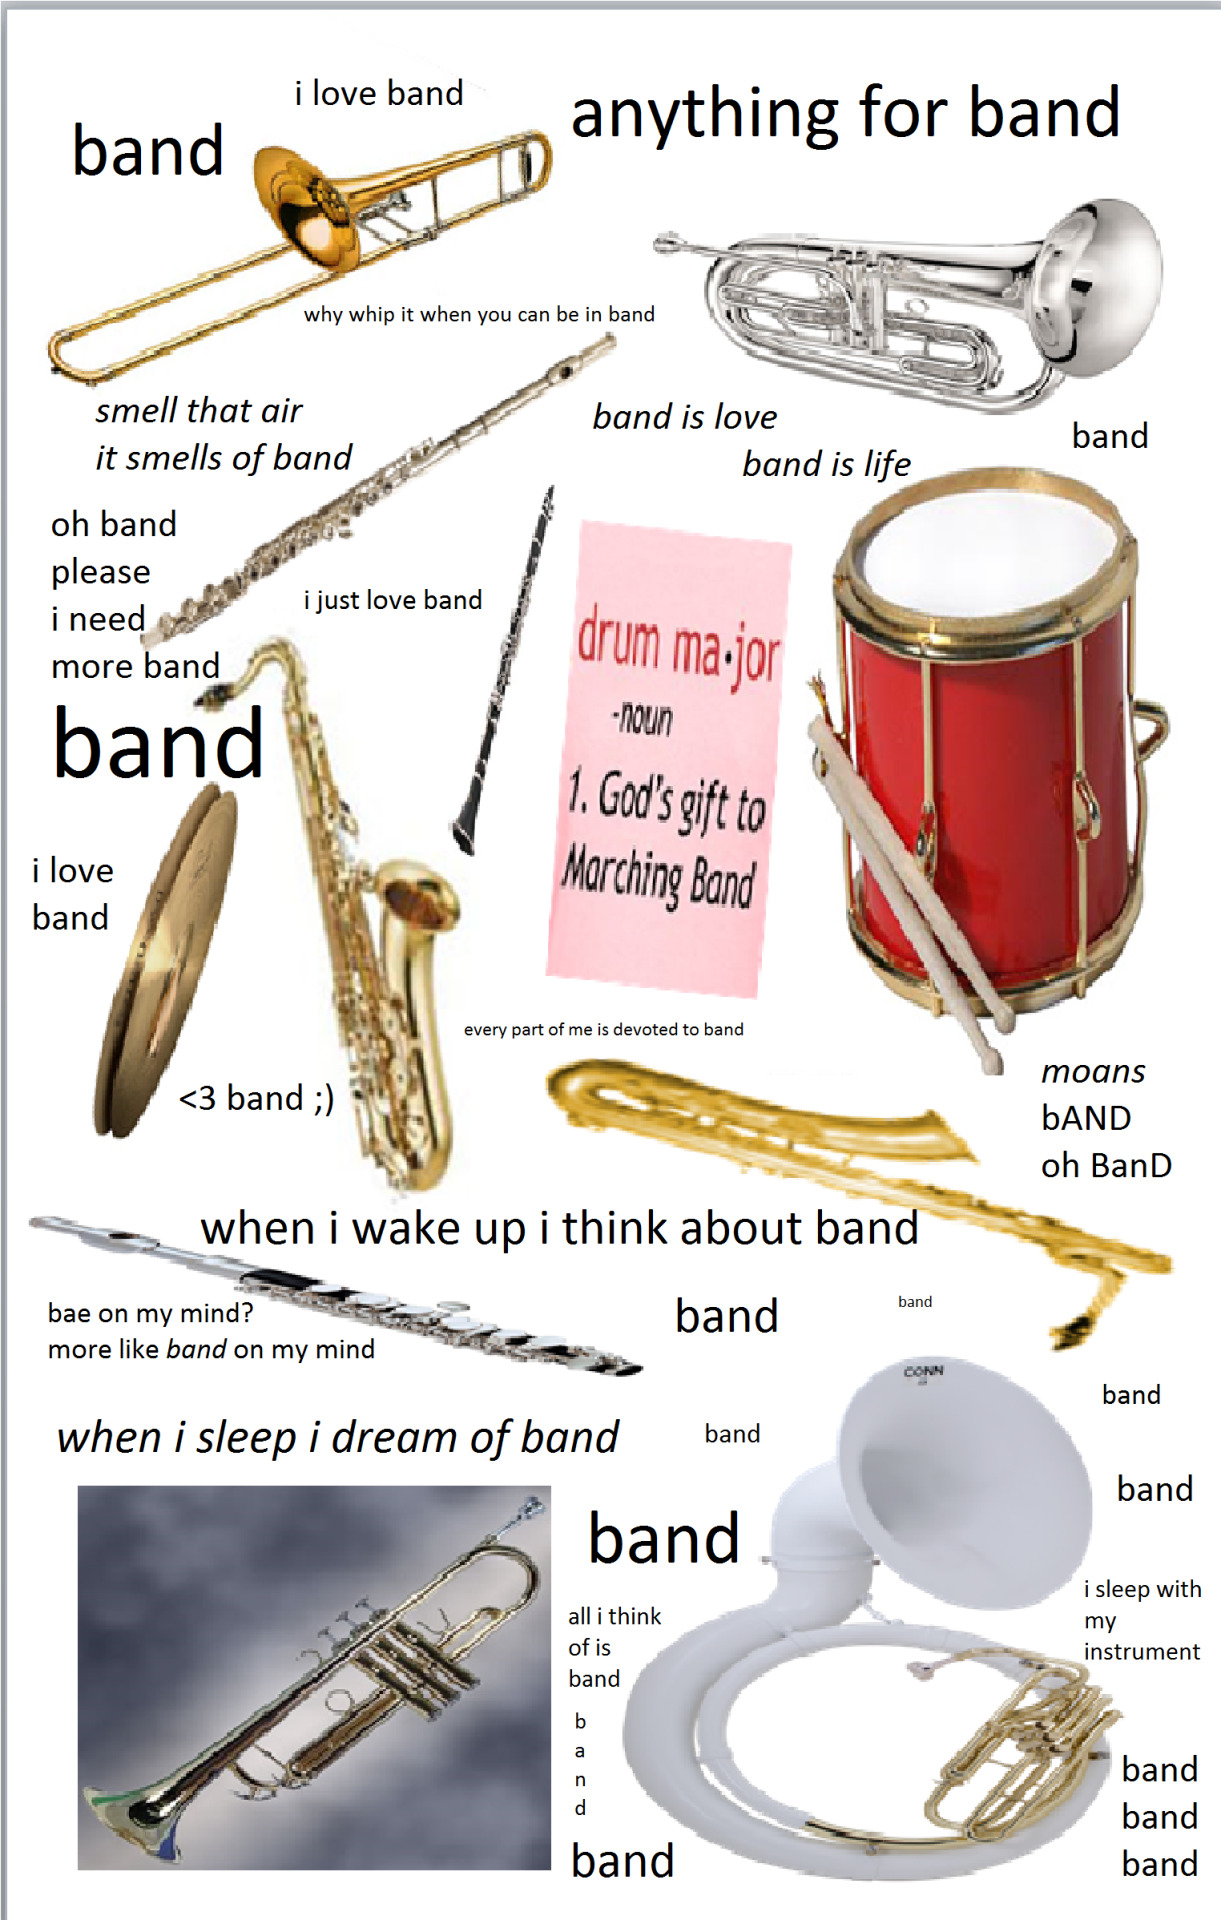 Marching band stereotypes